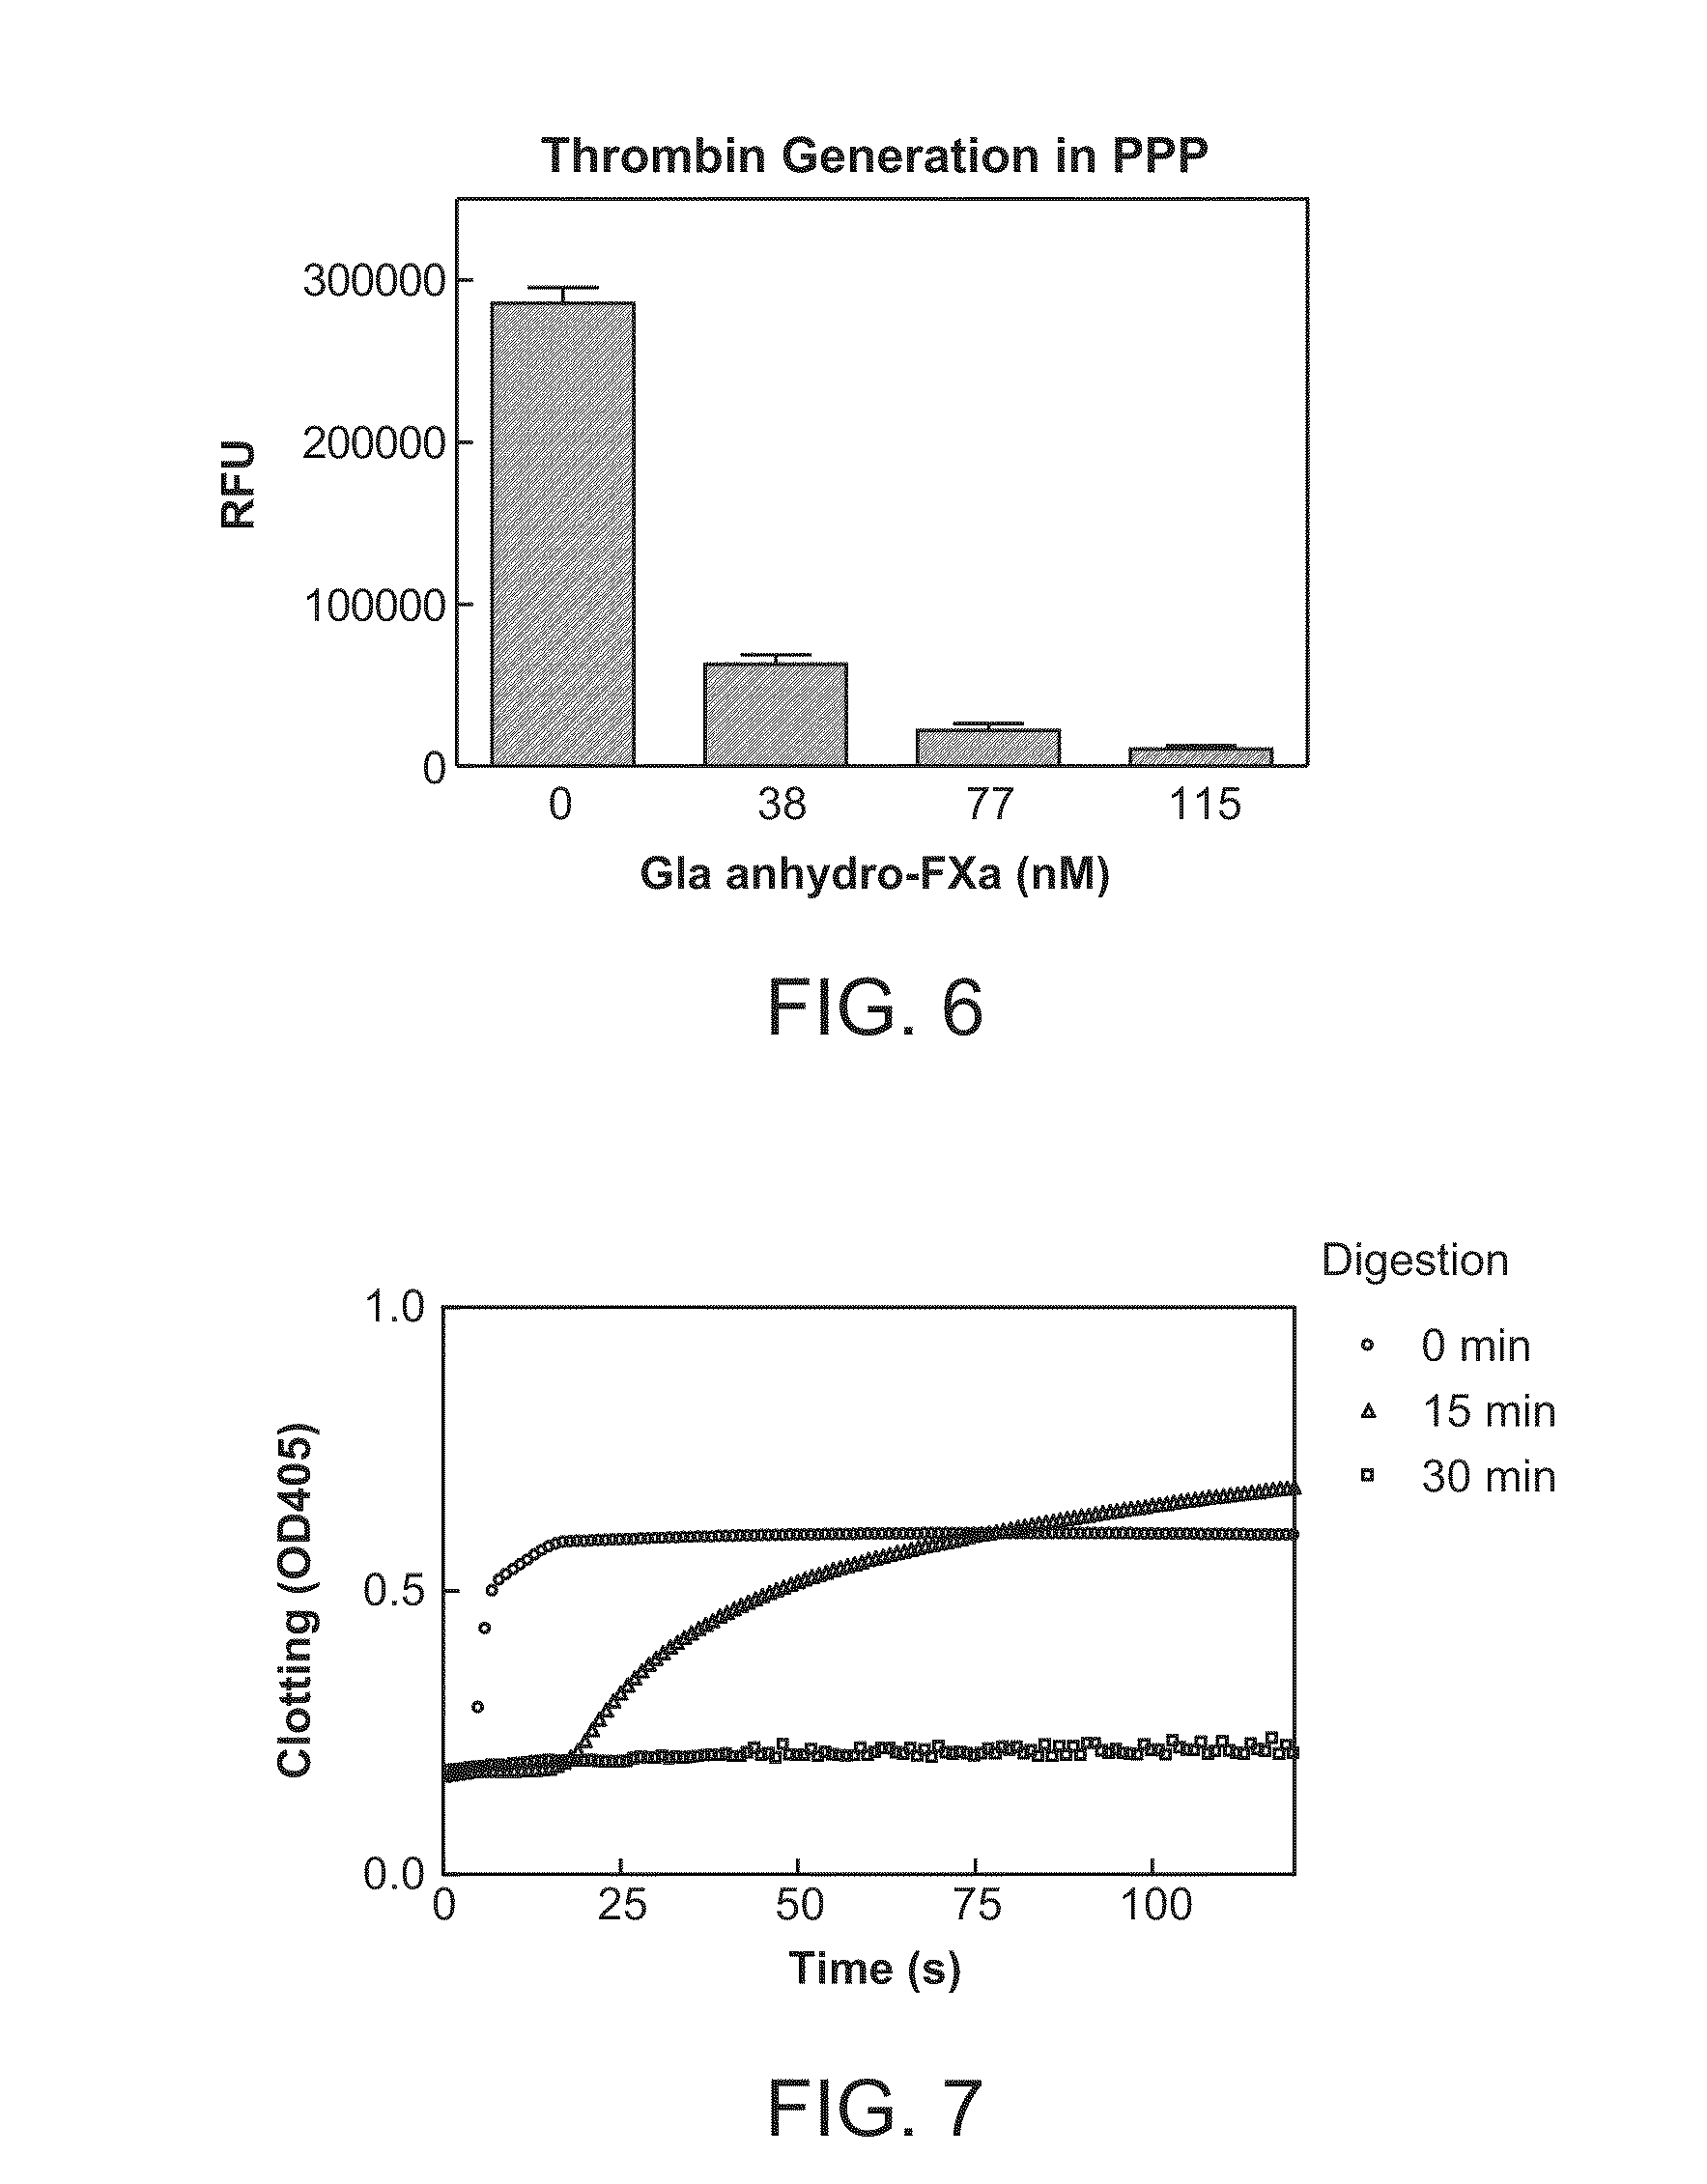 Antidotes for factor xa inhibitors and methods of using the same in combination with blood coagulating agents